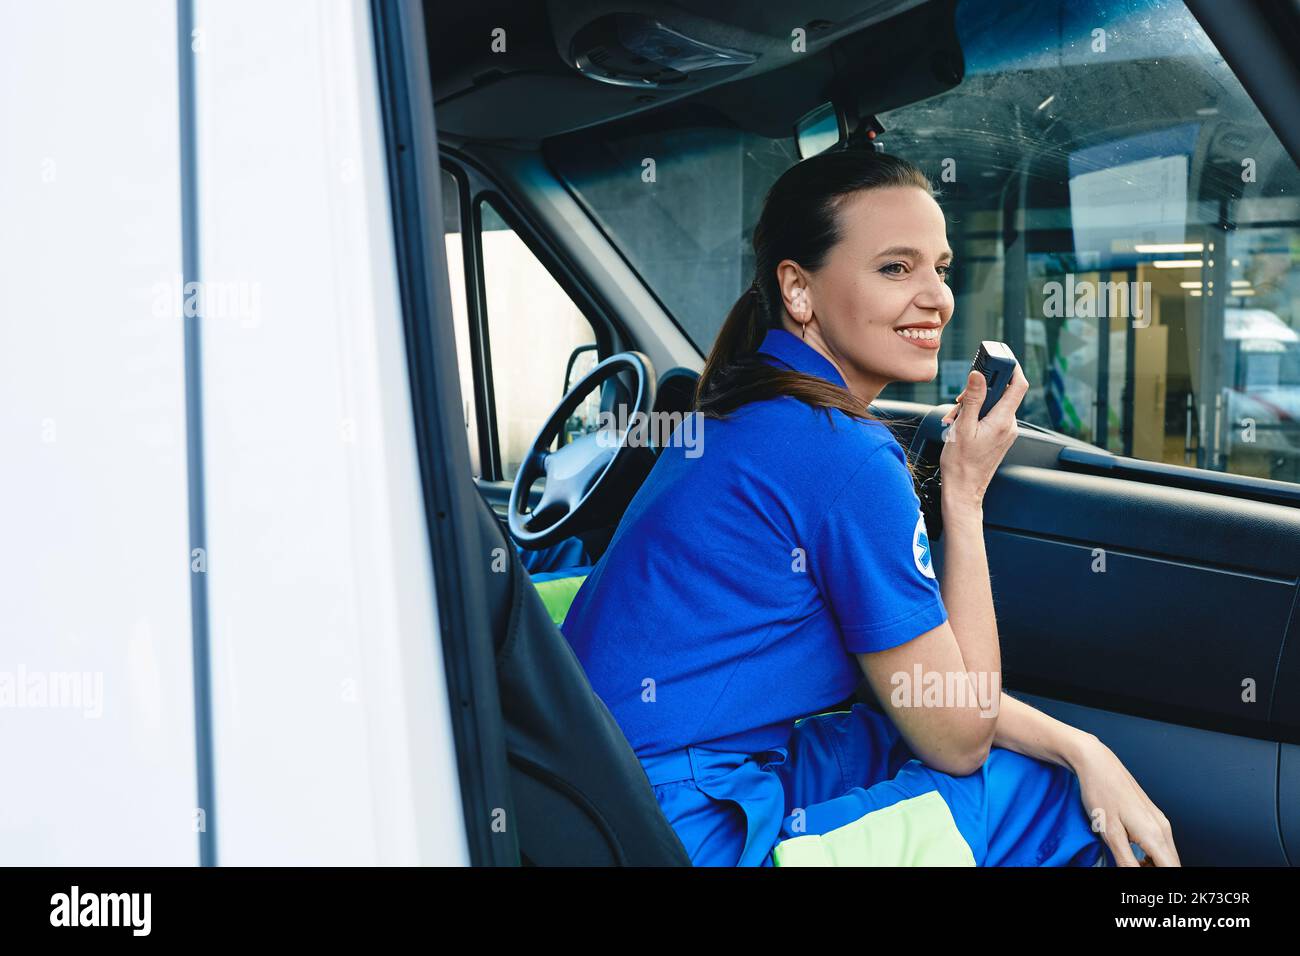 Emergency medical services worker. Smiling female paramedic talking on portable radio while sitting in ambulance Stock Photo